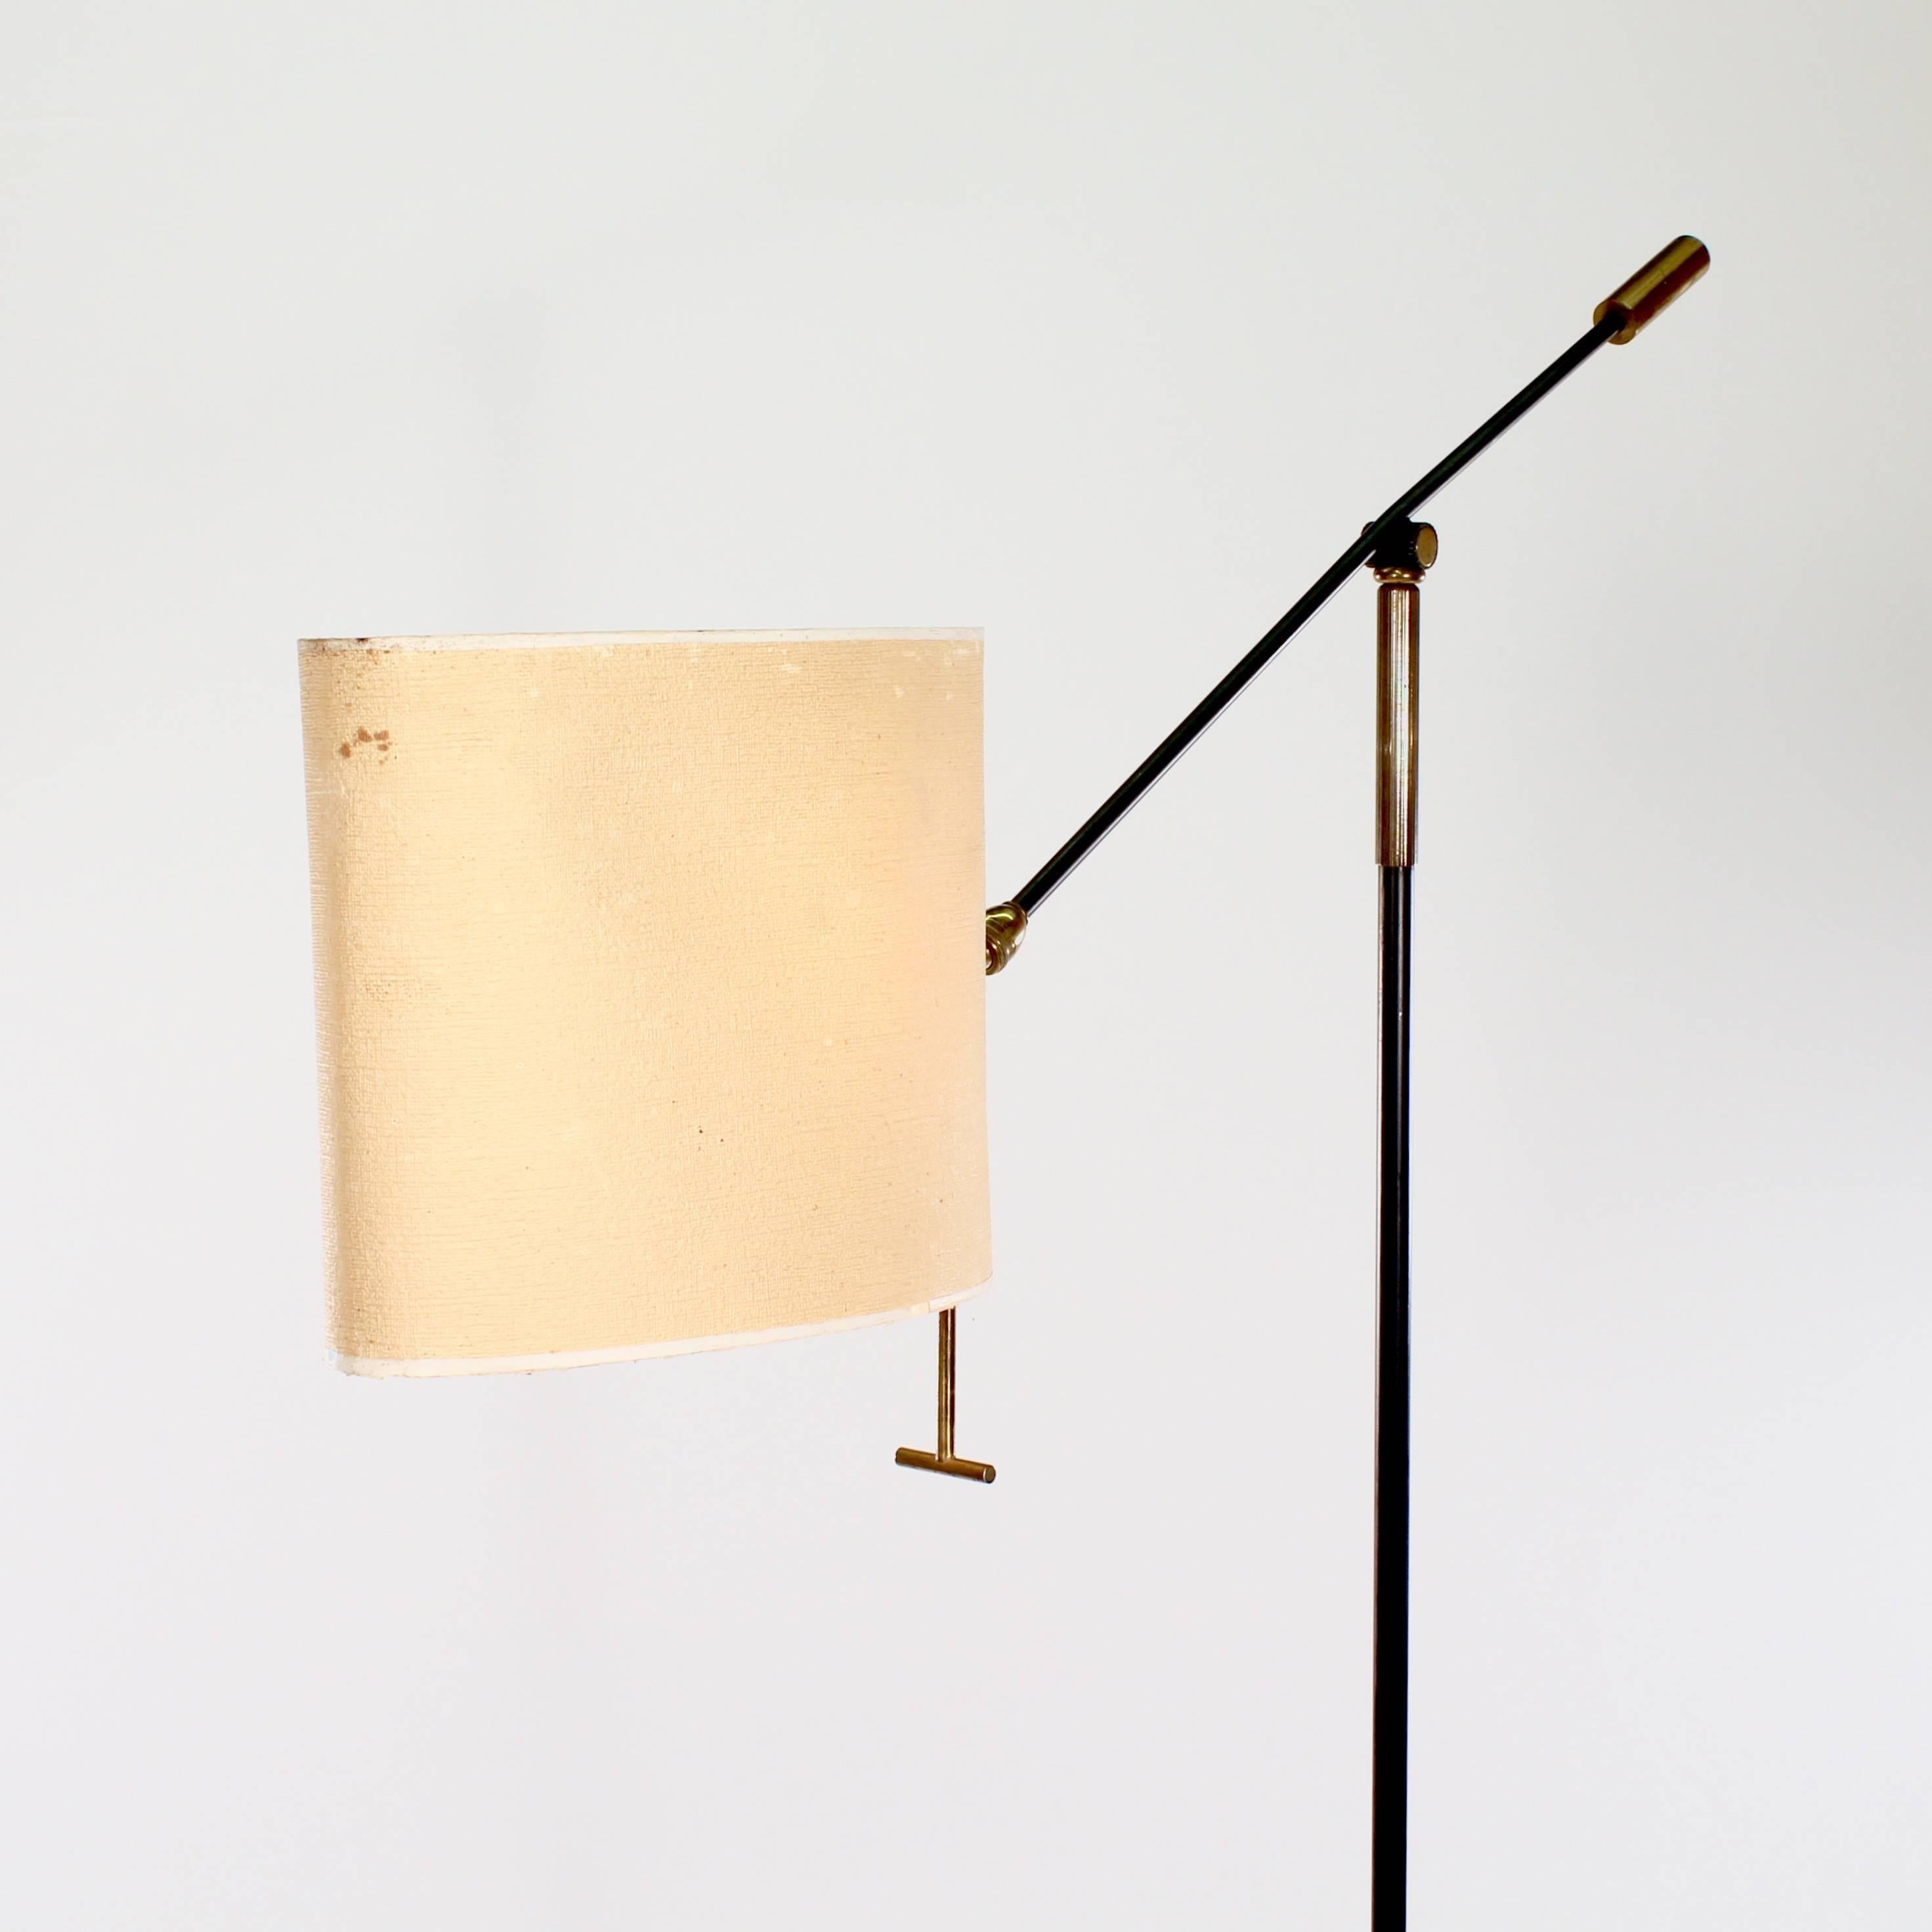 The counterbalanced arm supporting the original adjustable paper shade.

France, circa 1950s

Please note: the paper shade is original and provides a warm light. However, there is a rip to one side (see image). A quote can be provided to